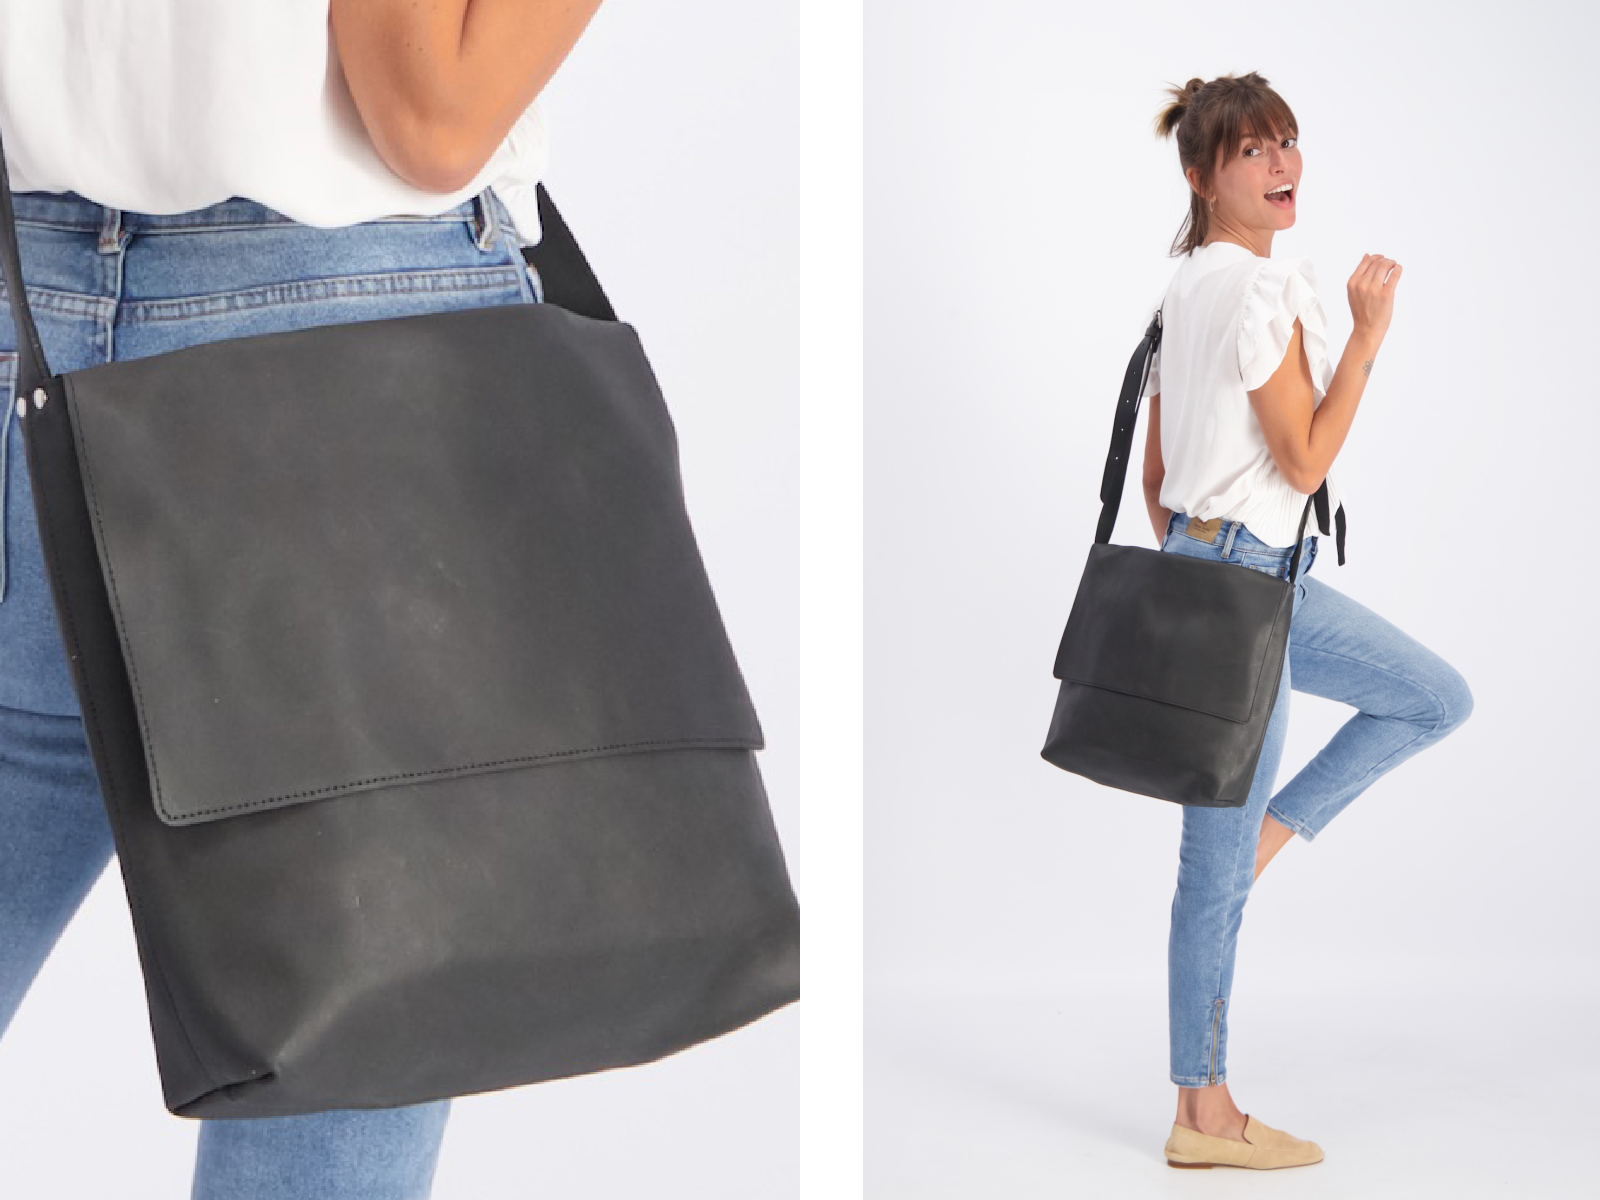 Shop For Women's Trendy Laptop Bags Online At Best Prices | LBB